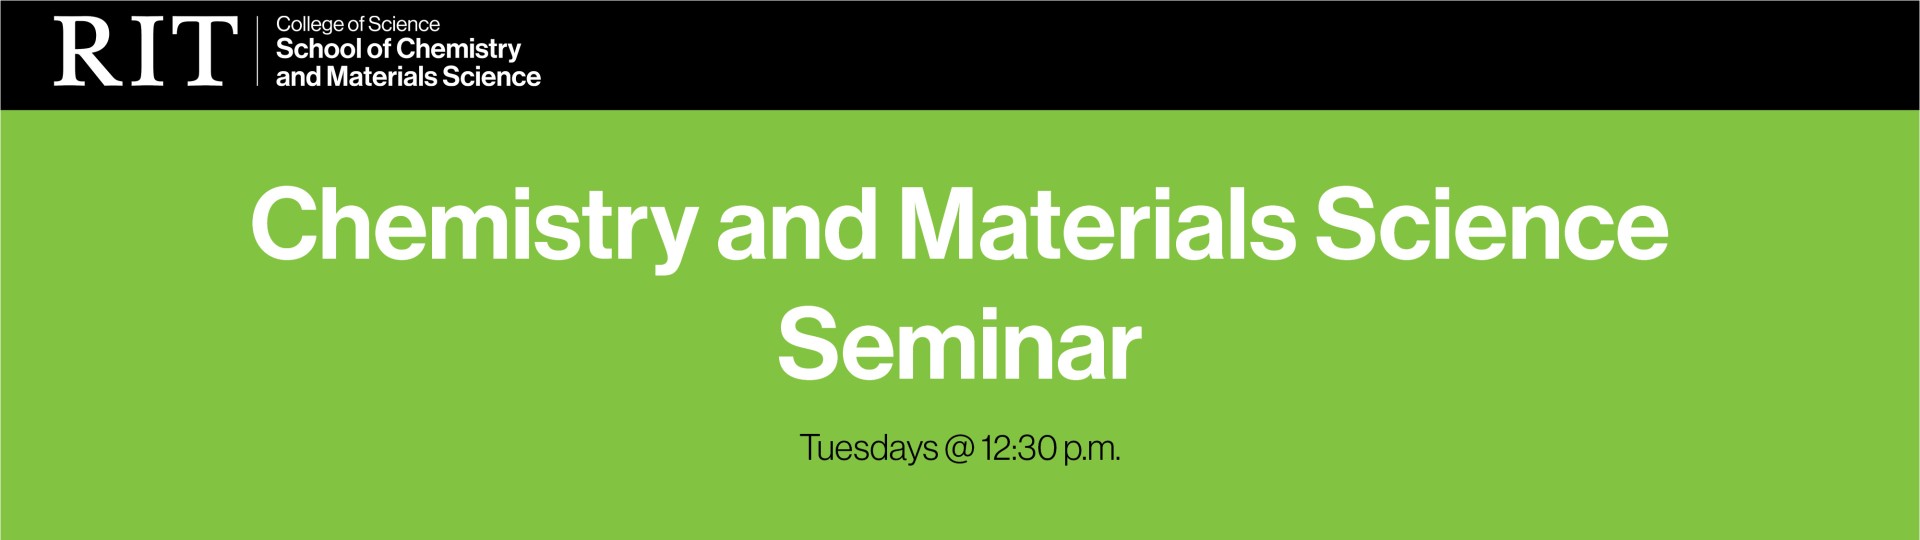 Chemistry and Materials Science Seminar